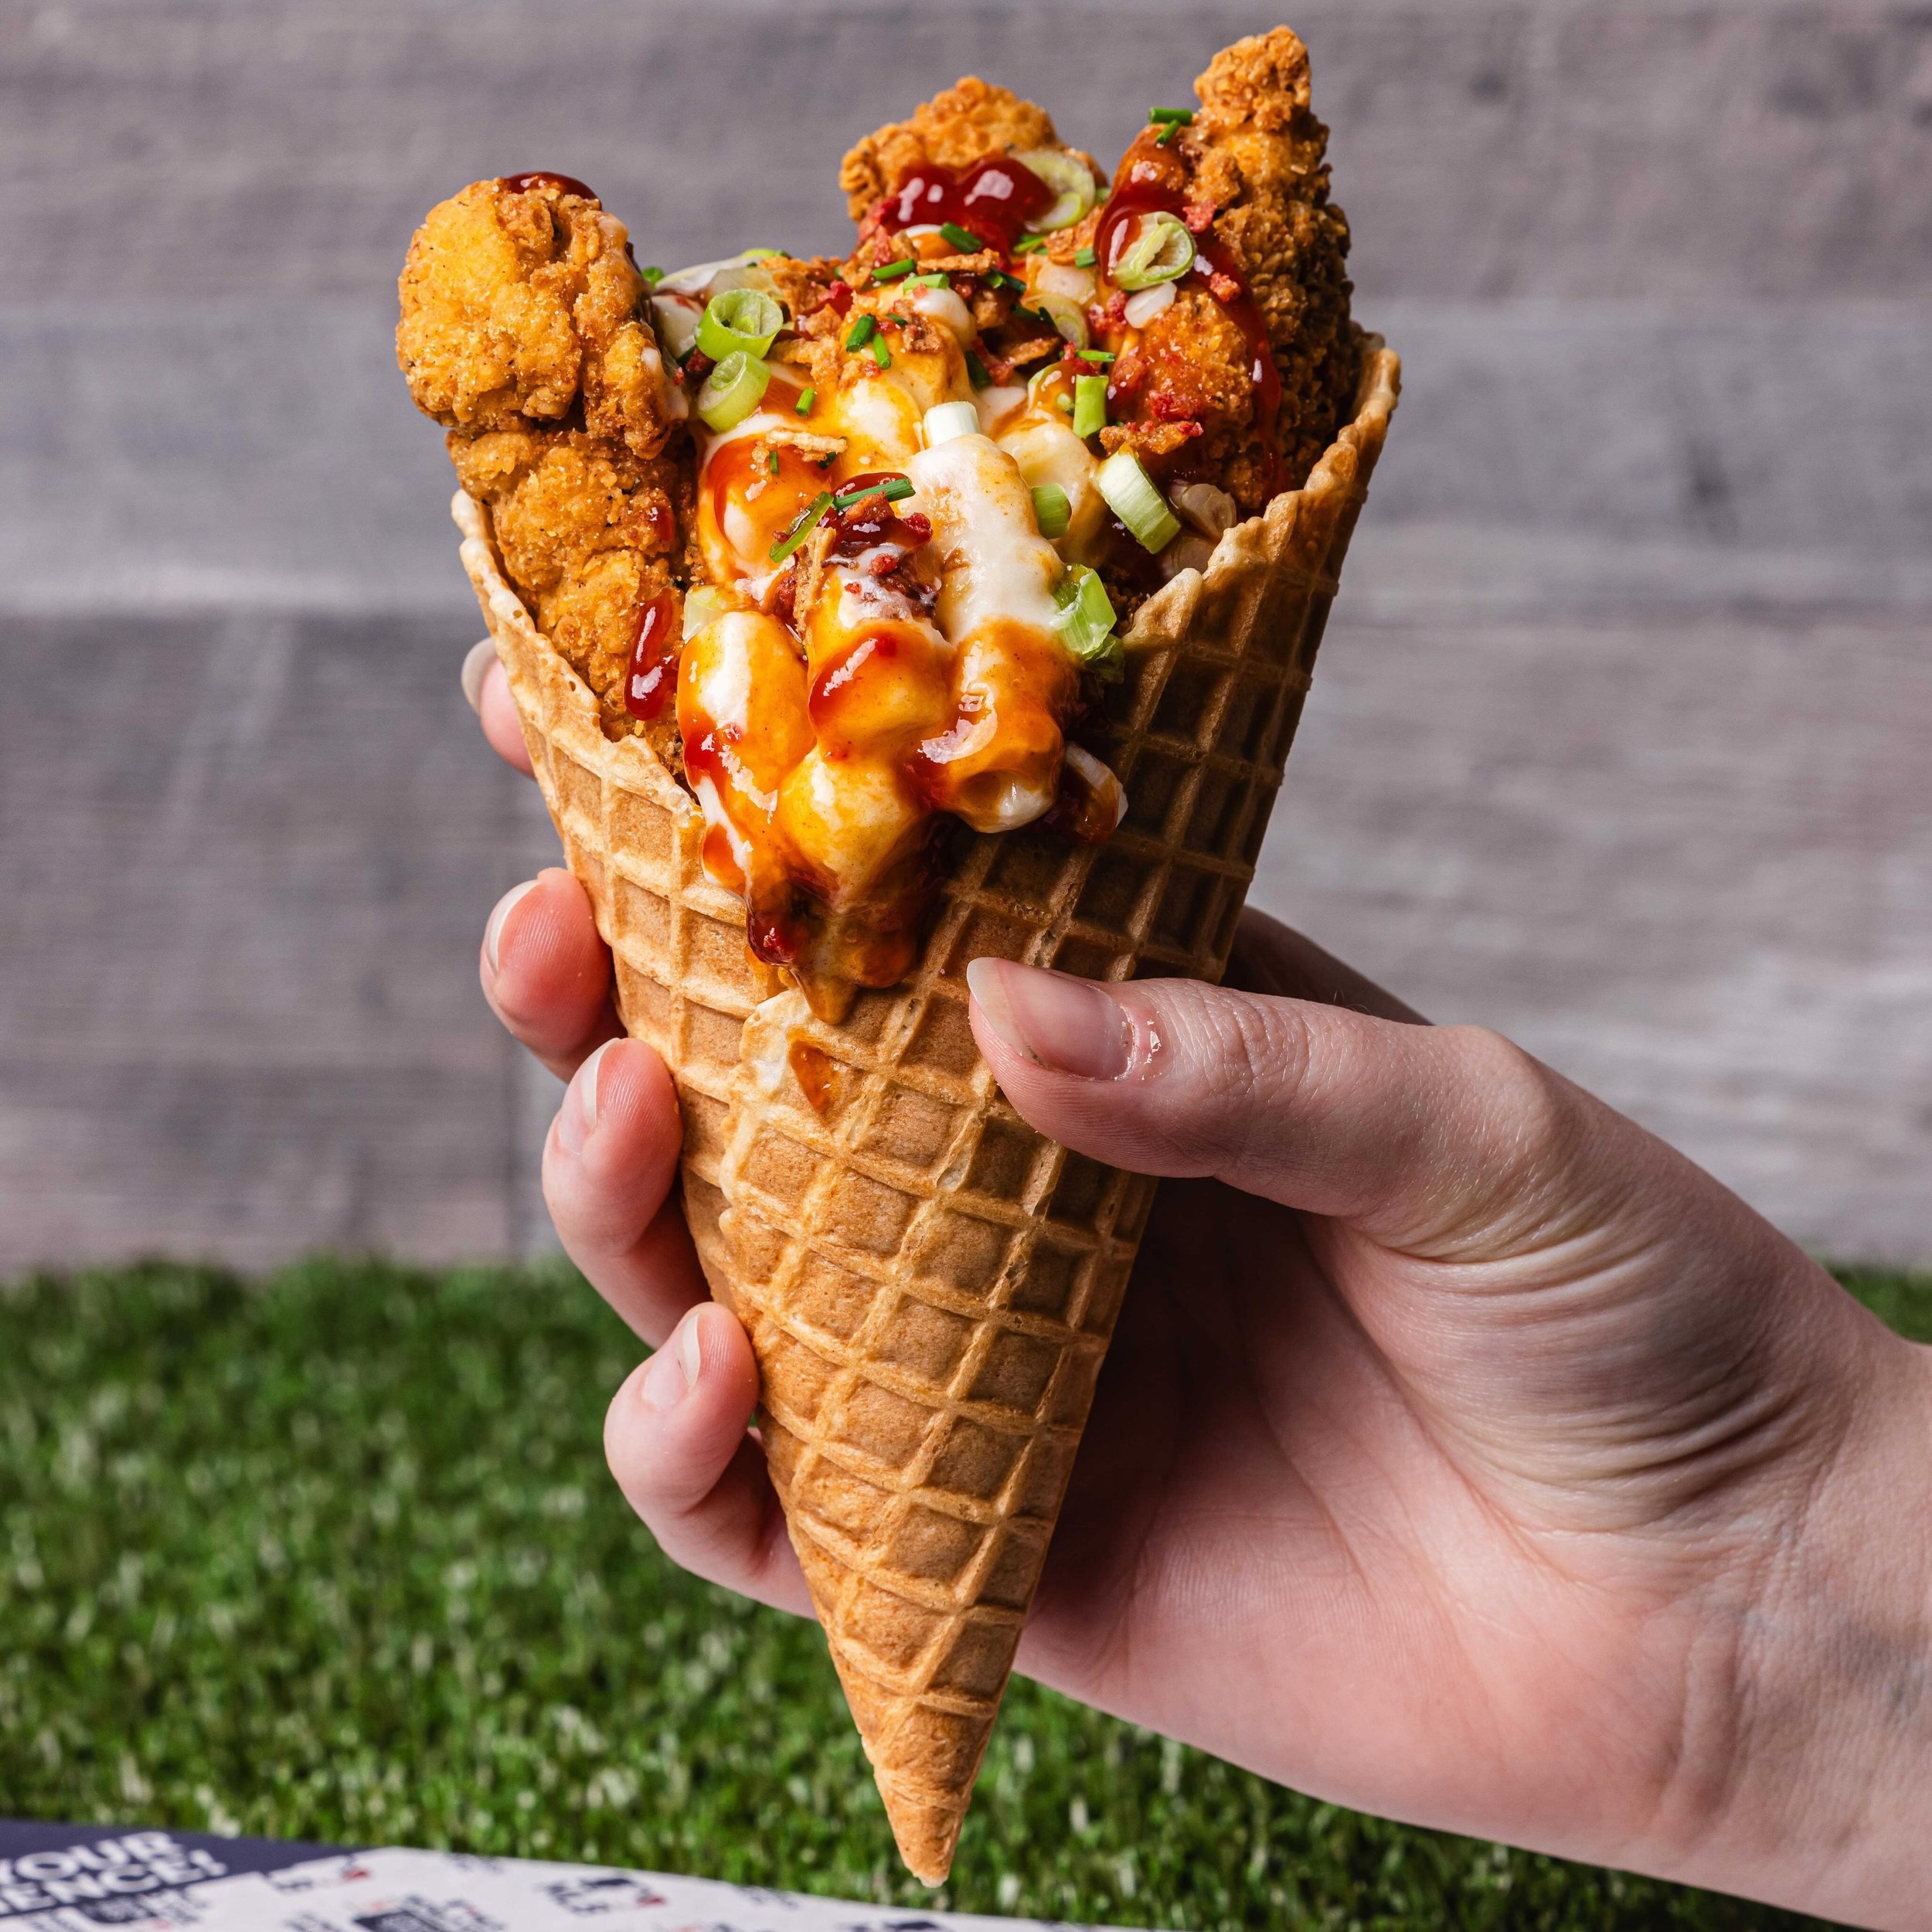 Freemans Event Partners and Delaware North have devised a new all-American menu, as the Major League Baseball World Tour London Series returns to the London Stadium next month - full story is on our website (link is in our bio) 

#contractcatering #c